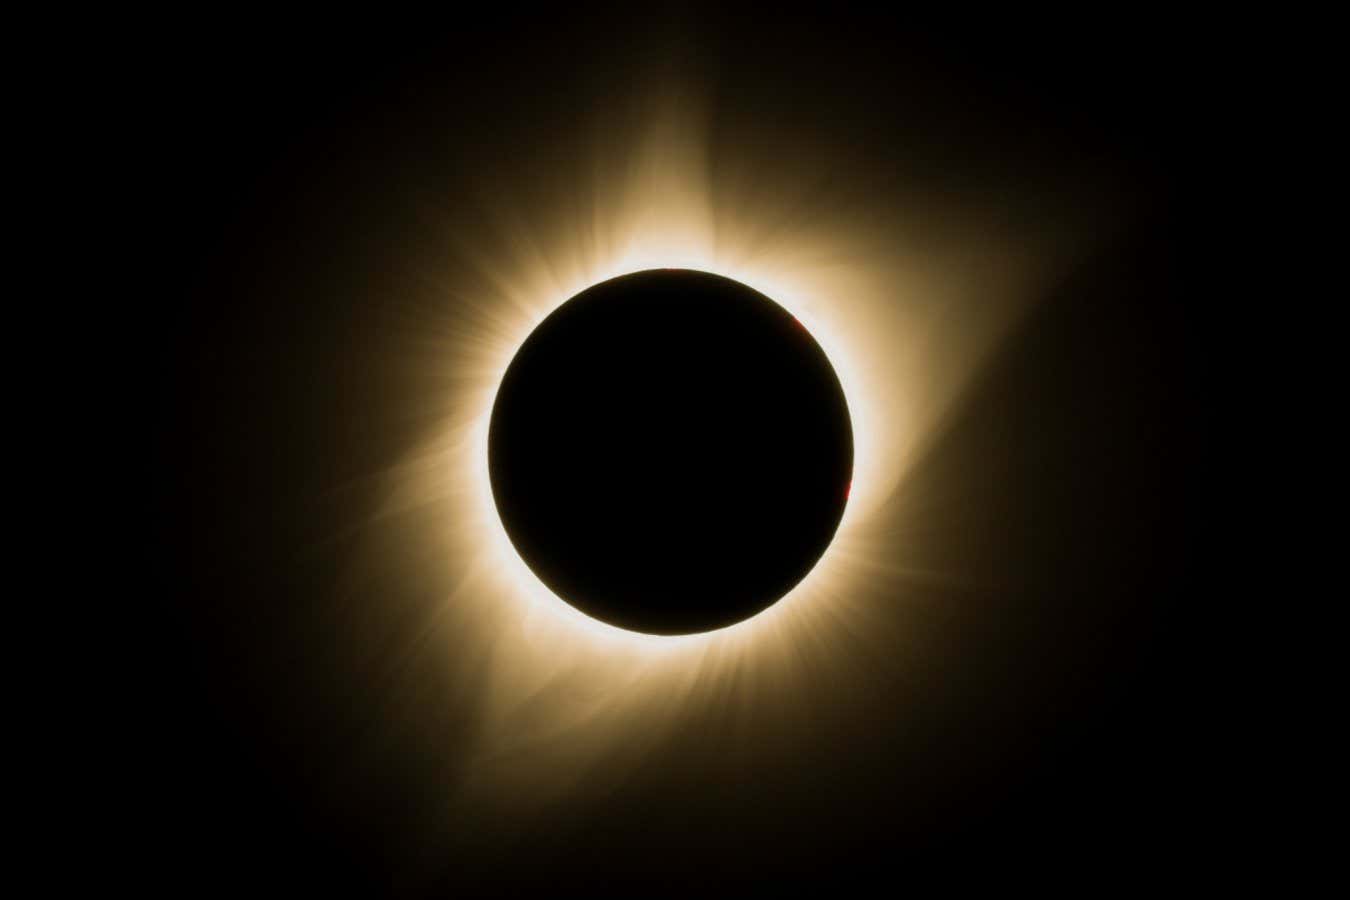 How could we make a solar eclipse happen every day? New York Digital News